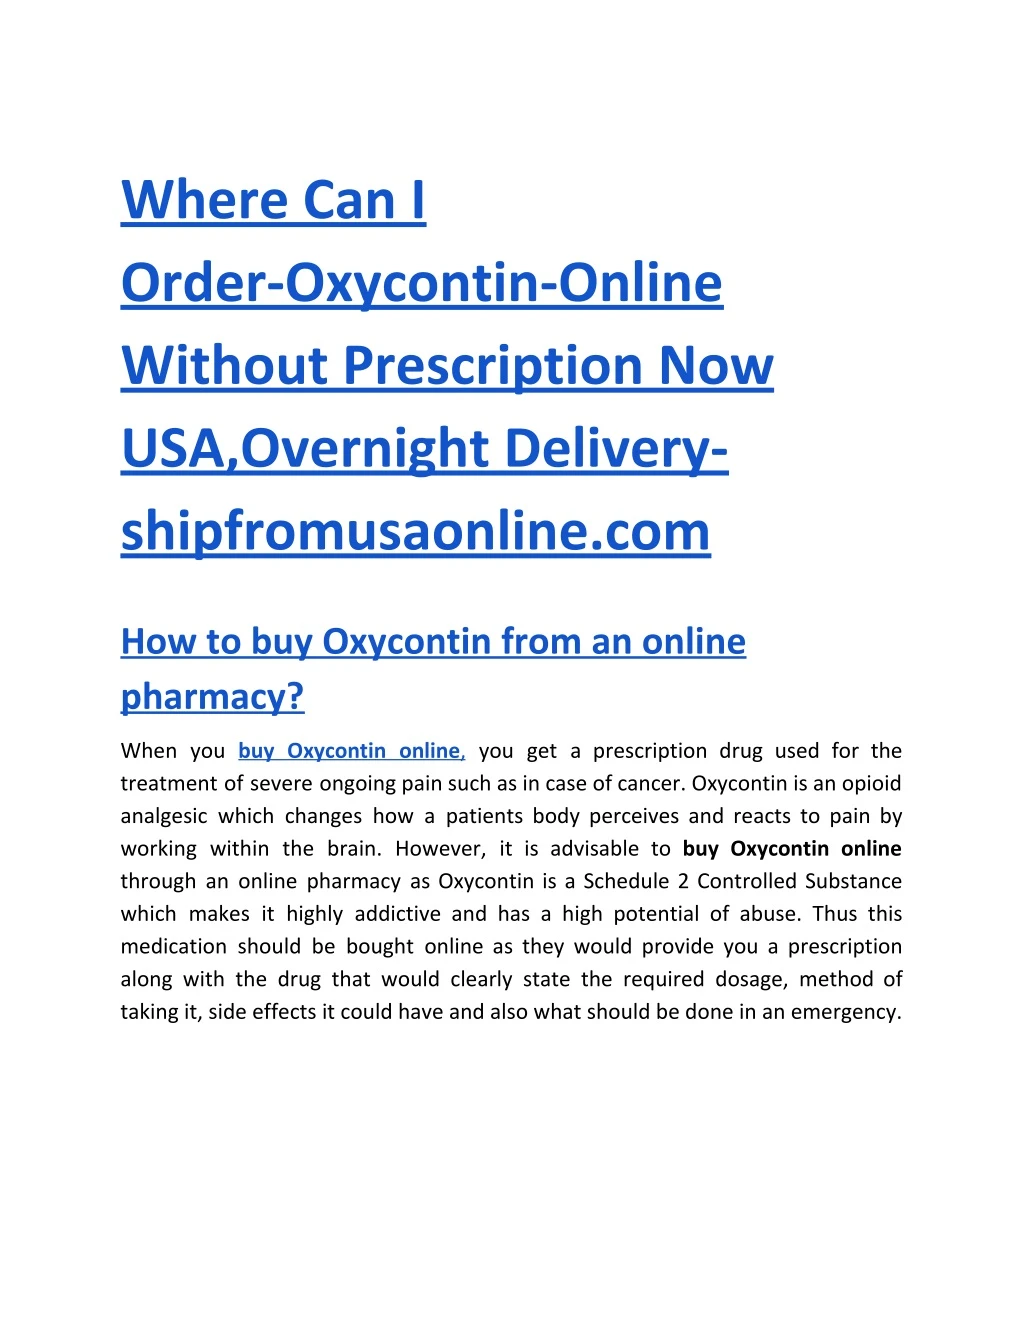 where can i order oxycontin online without